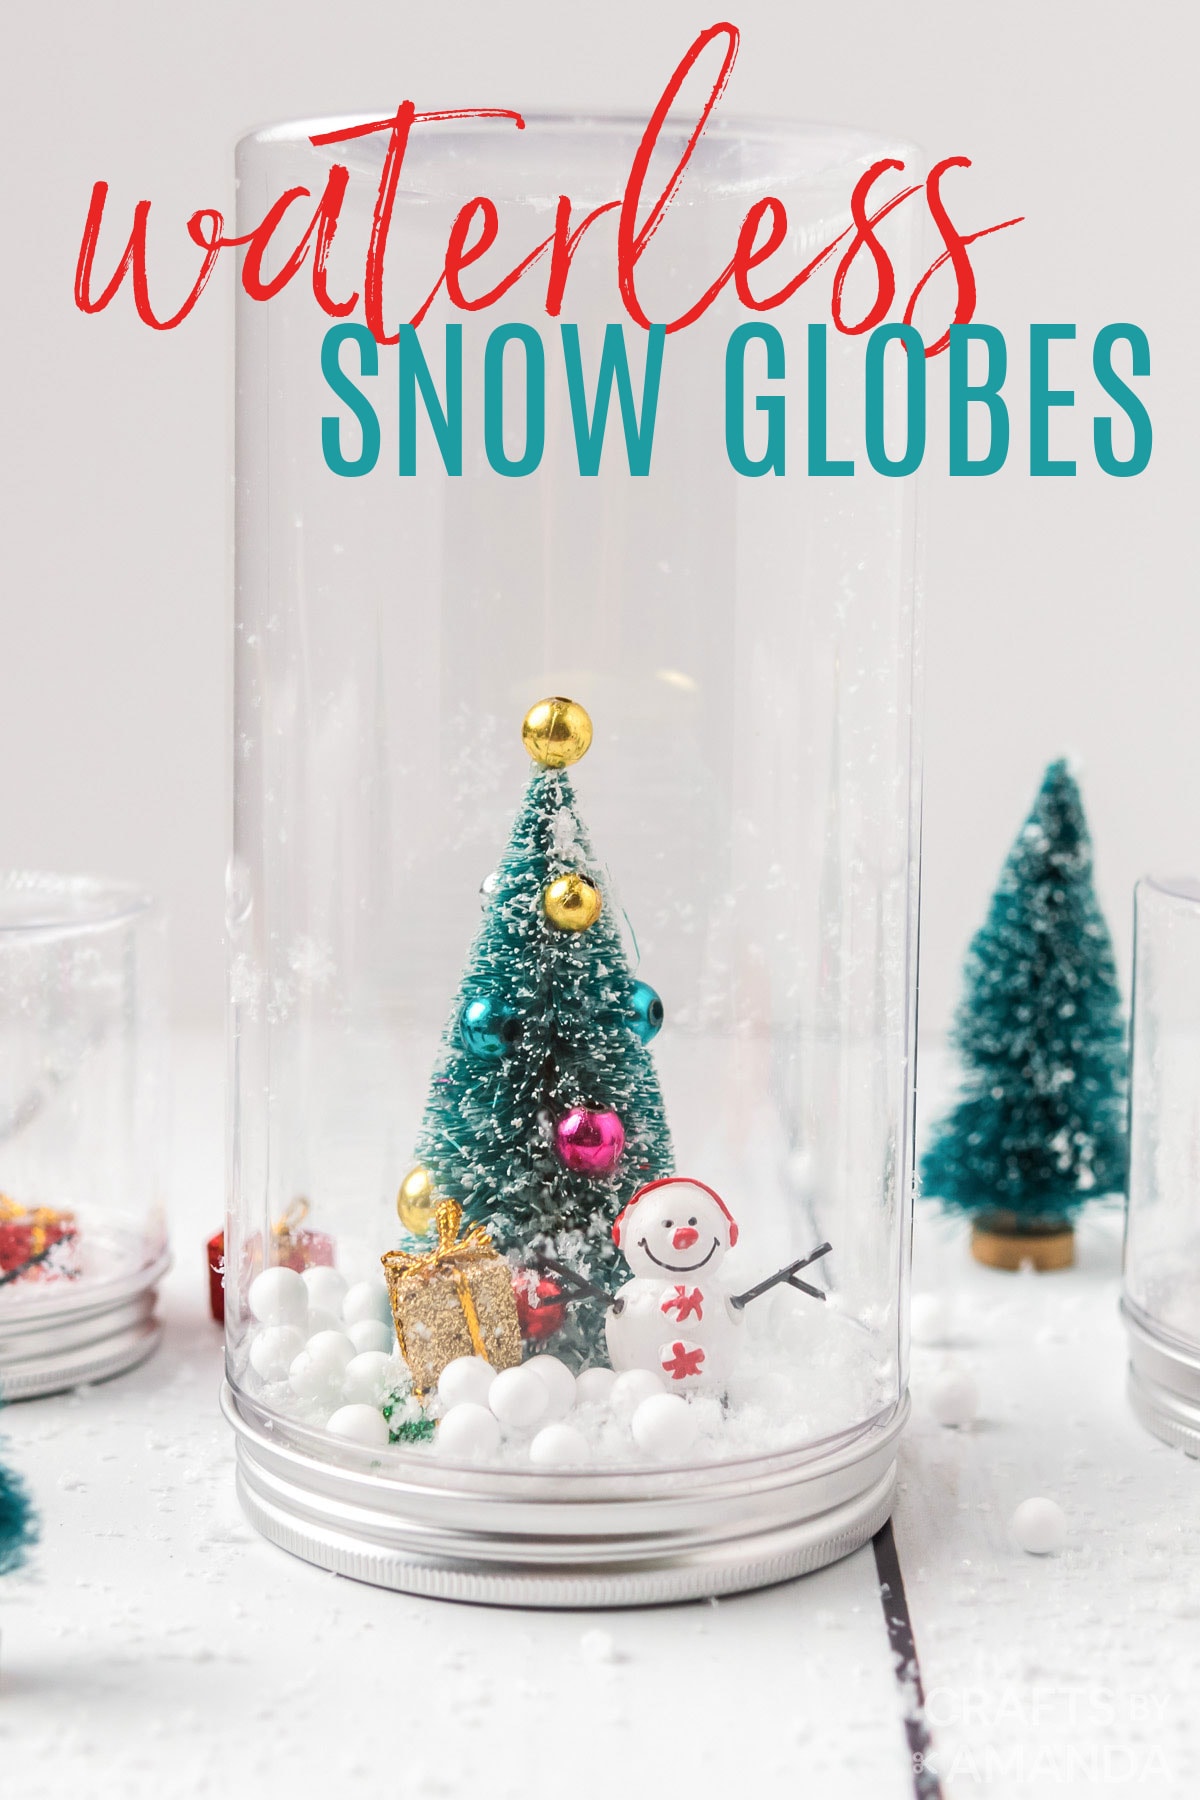 Waterless Snow Globes - Crafts by Amanda - Christmas Crafts